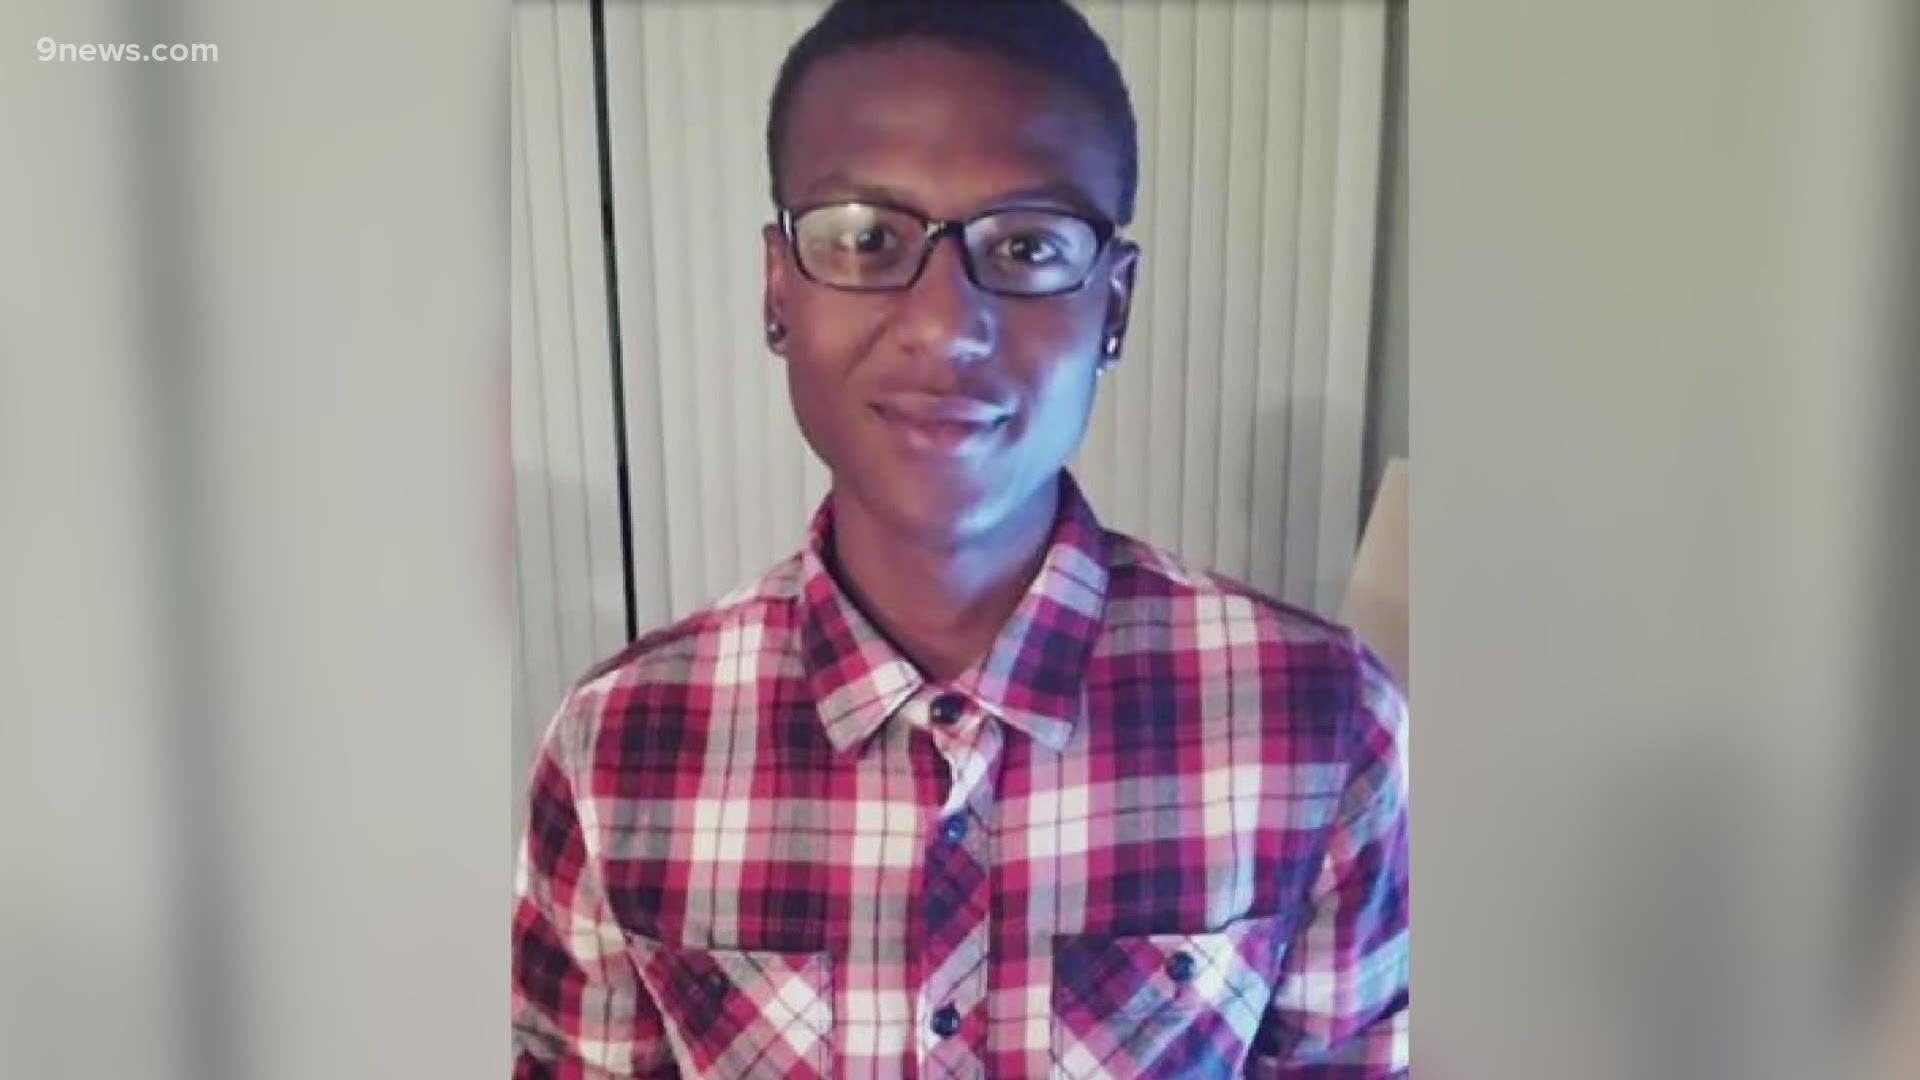 The family of Elijah McClain has filed a civil rights lawsuit against Aurora officers, medics who responded to the scene in 2019.